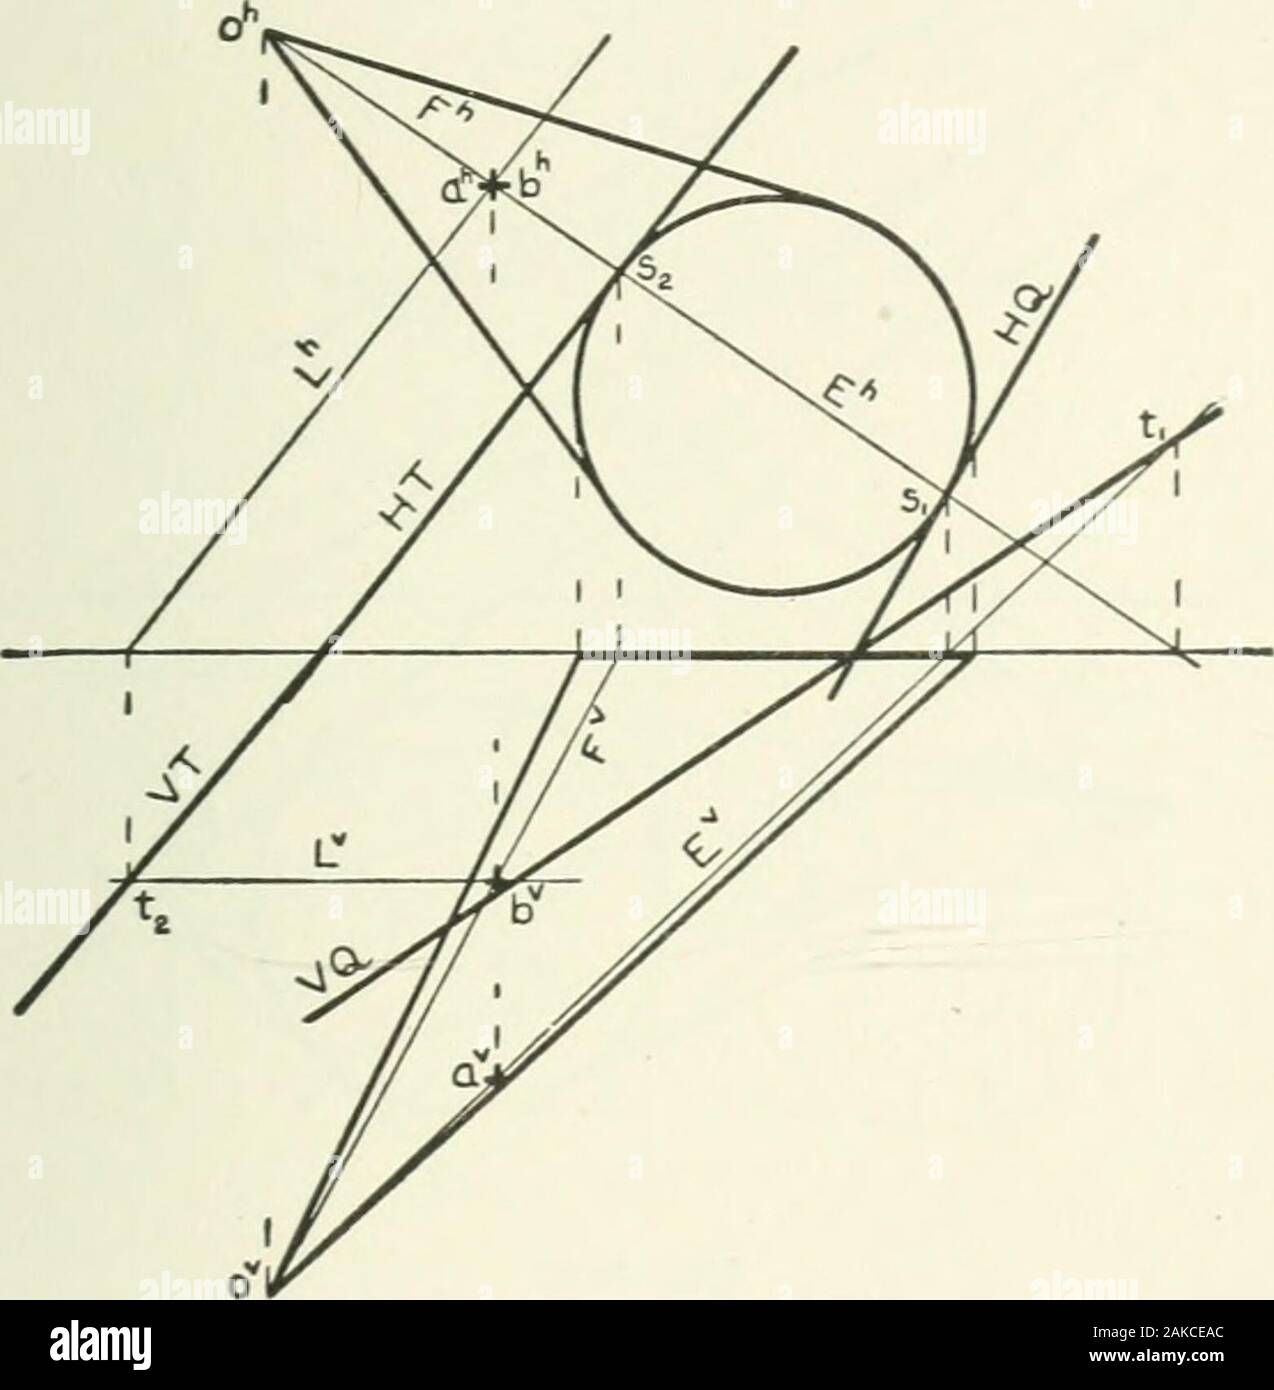 Descriptive geometry . ent to a cone contains the vertex. Problem 31. To pass a plane tangent to a cone at a given pointin the surface. Analysis. The plane is determined by the element whichpasses through the given point, and a line tangent to the baseat the point where this element intersects the base (§§ 155,162, &). Construction. Case I. 77/&lt;= base of the cone lien in H or V. Example 1 (Fig. 274). The base of this cone lies in H.Let a (oh. a), lying in the element E (Eh. E*) be the given pointin the surface. Since the required tangent plane contains theelement E, find the traces sx and t Stock Photo